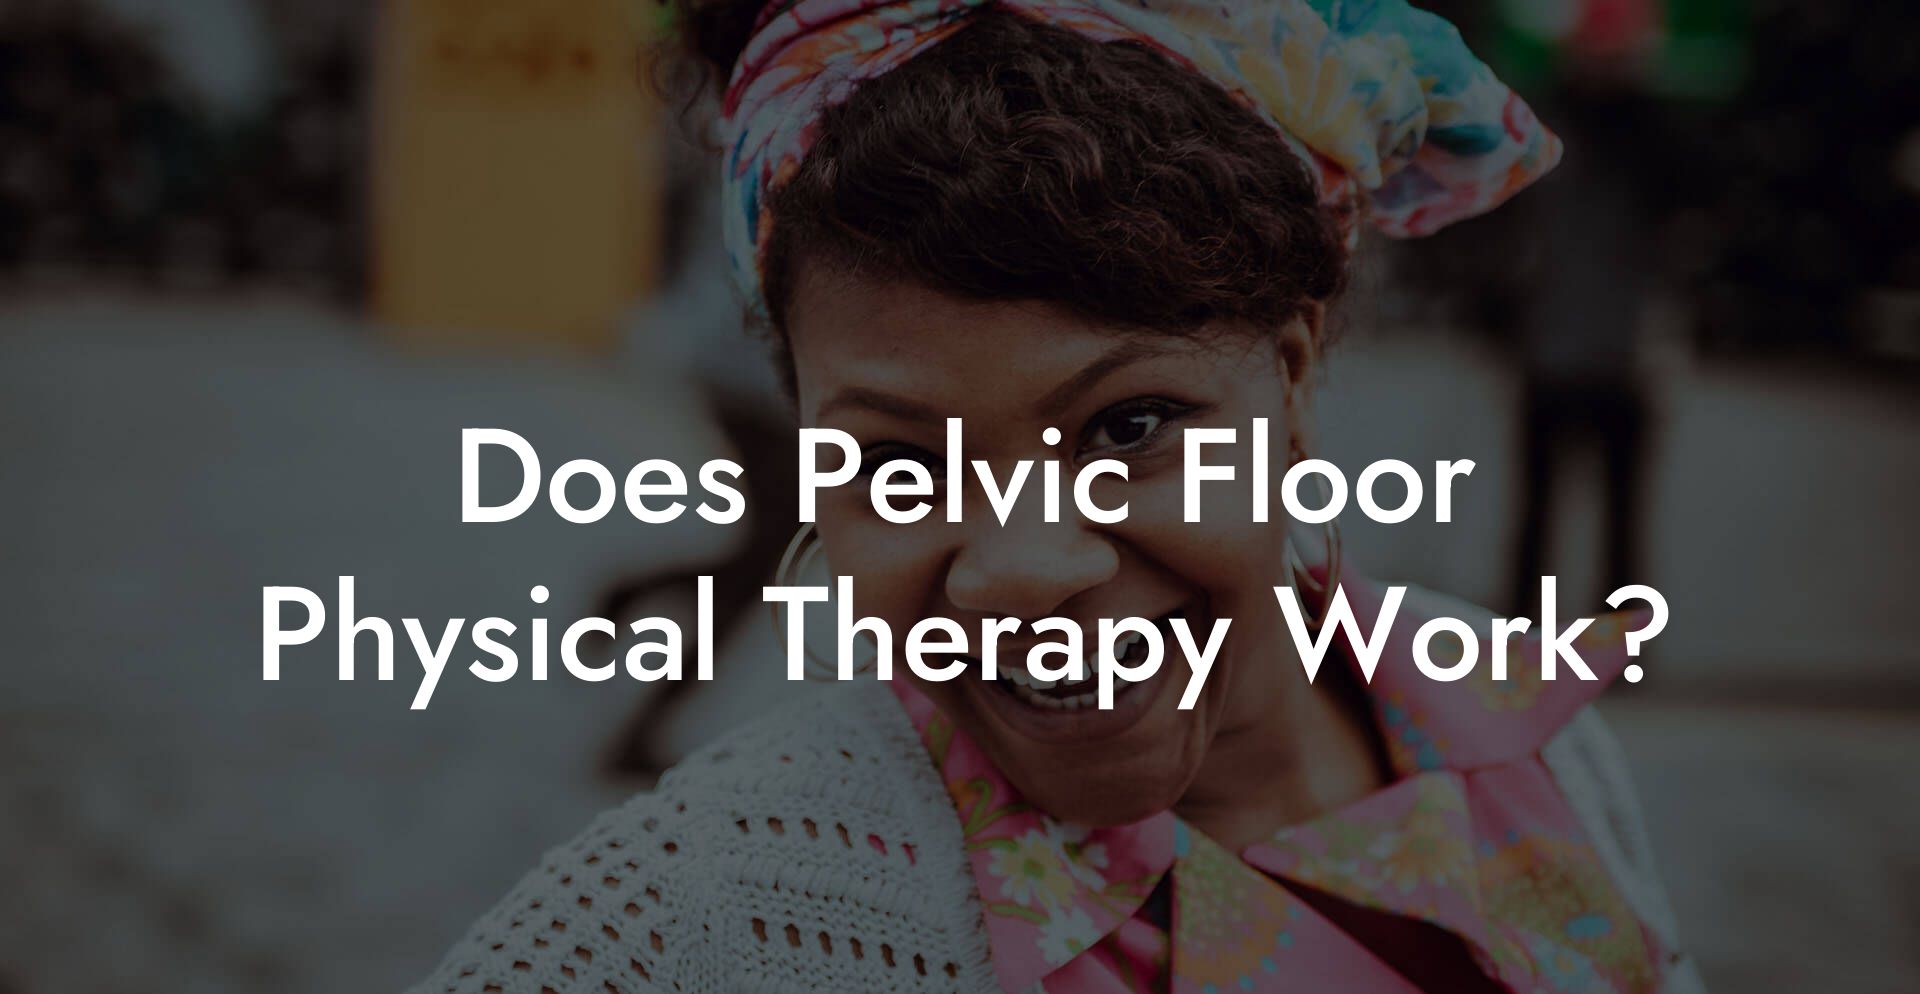 Does Pelvic Floor Physical Therapy Work?